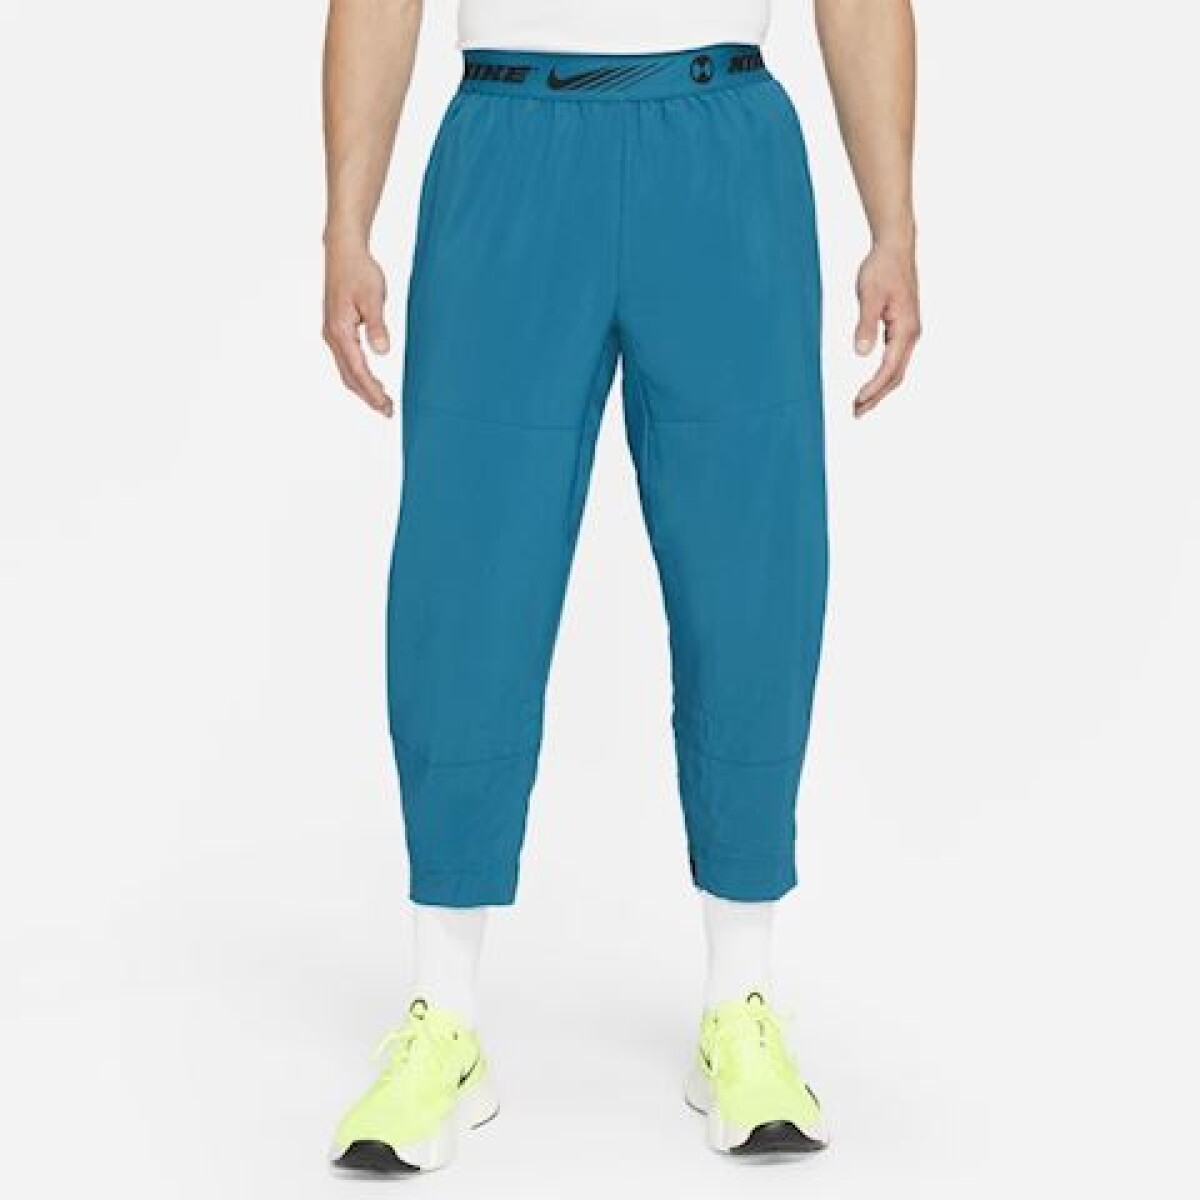 Pantalon Nike training hombre GREEN ABYSS/(MEAN GREEN) - S/C 